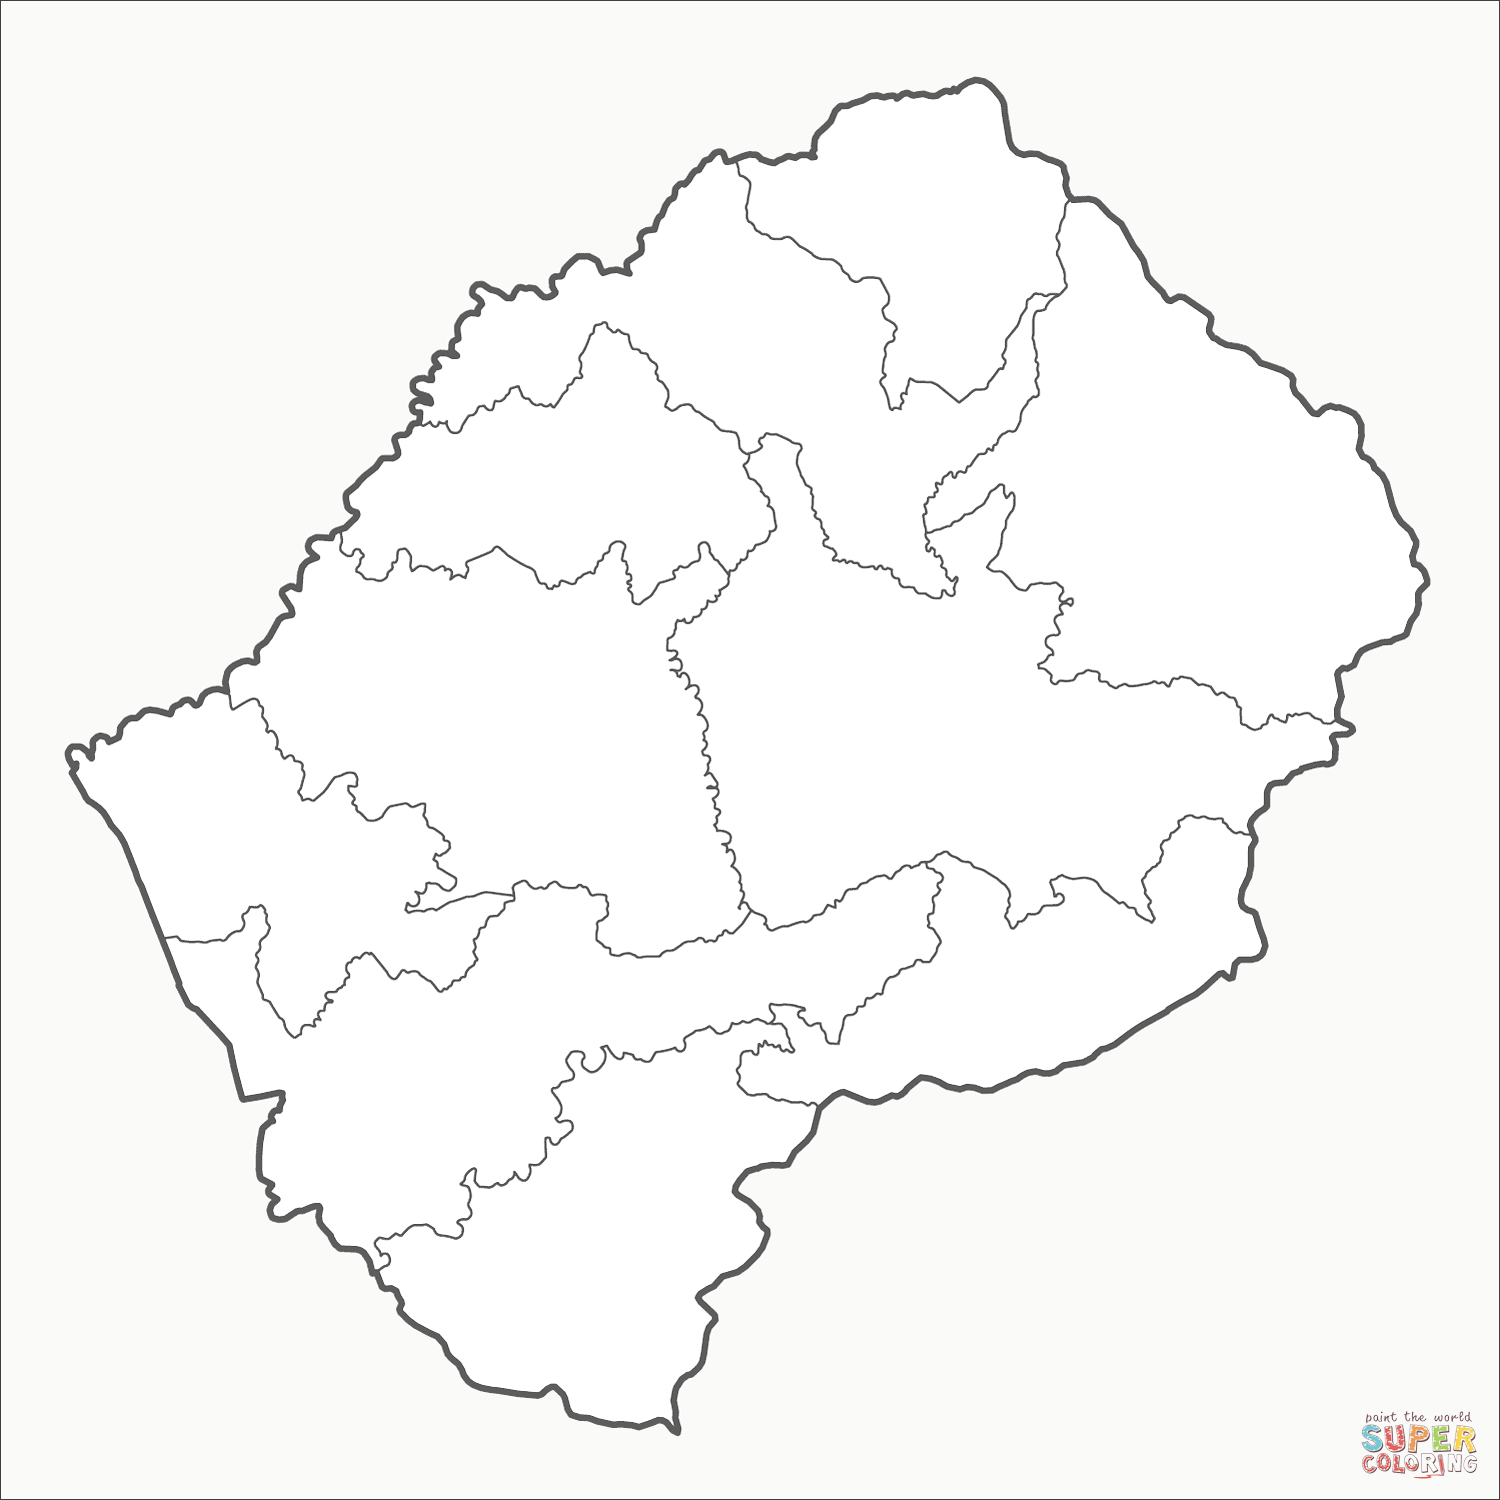 Lesotho map coloring page free printable coloring pages